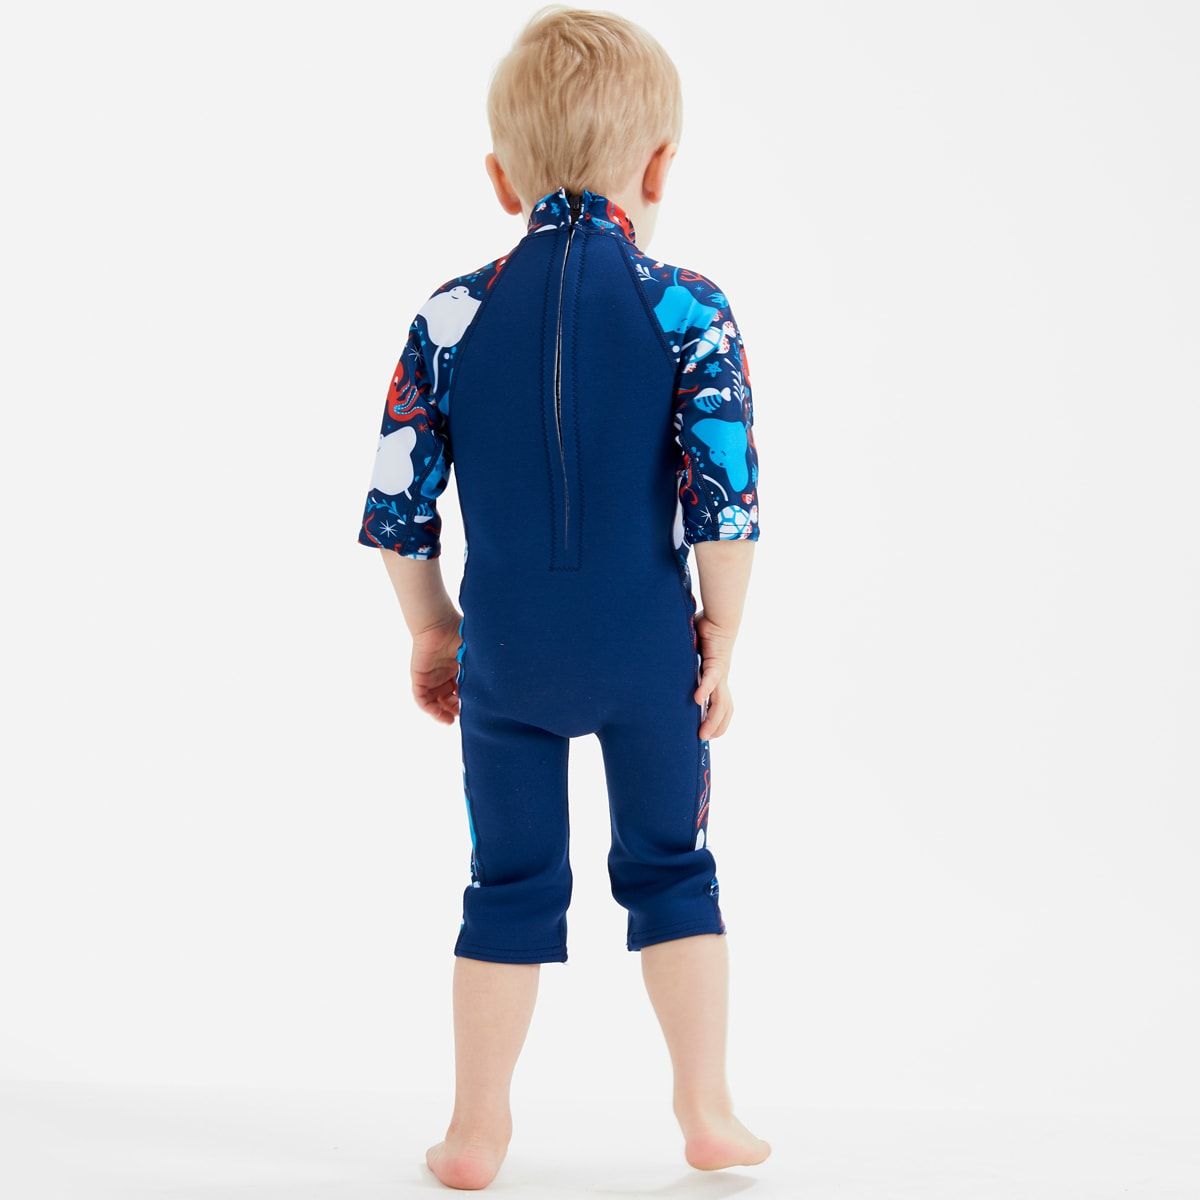 Lifestyle image of child wearing a one piece UV sun and sea wetsuit for toddlers in navy blue with cyan trims. Sea life themed print including turtles, octopus, fish, stingray and more on sleeves, side panels and neck.